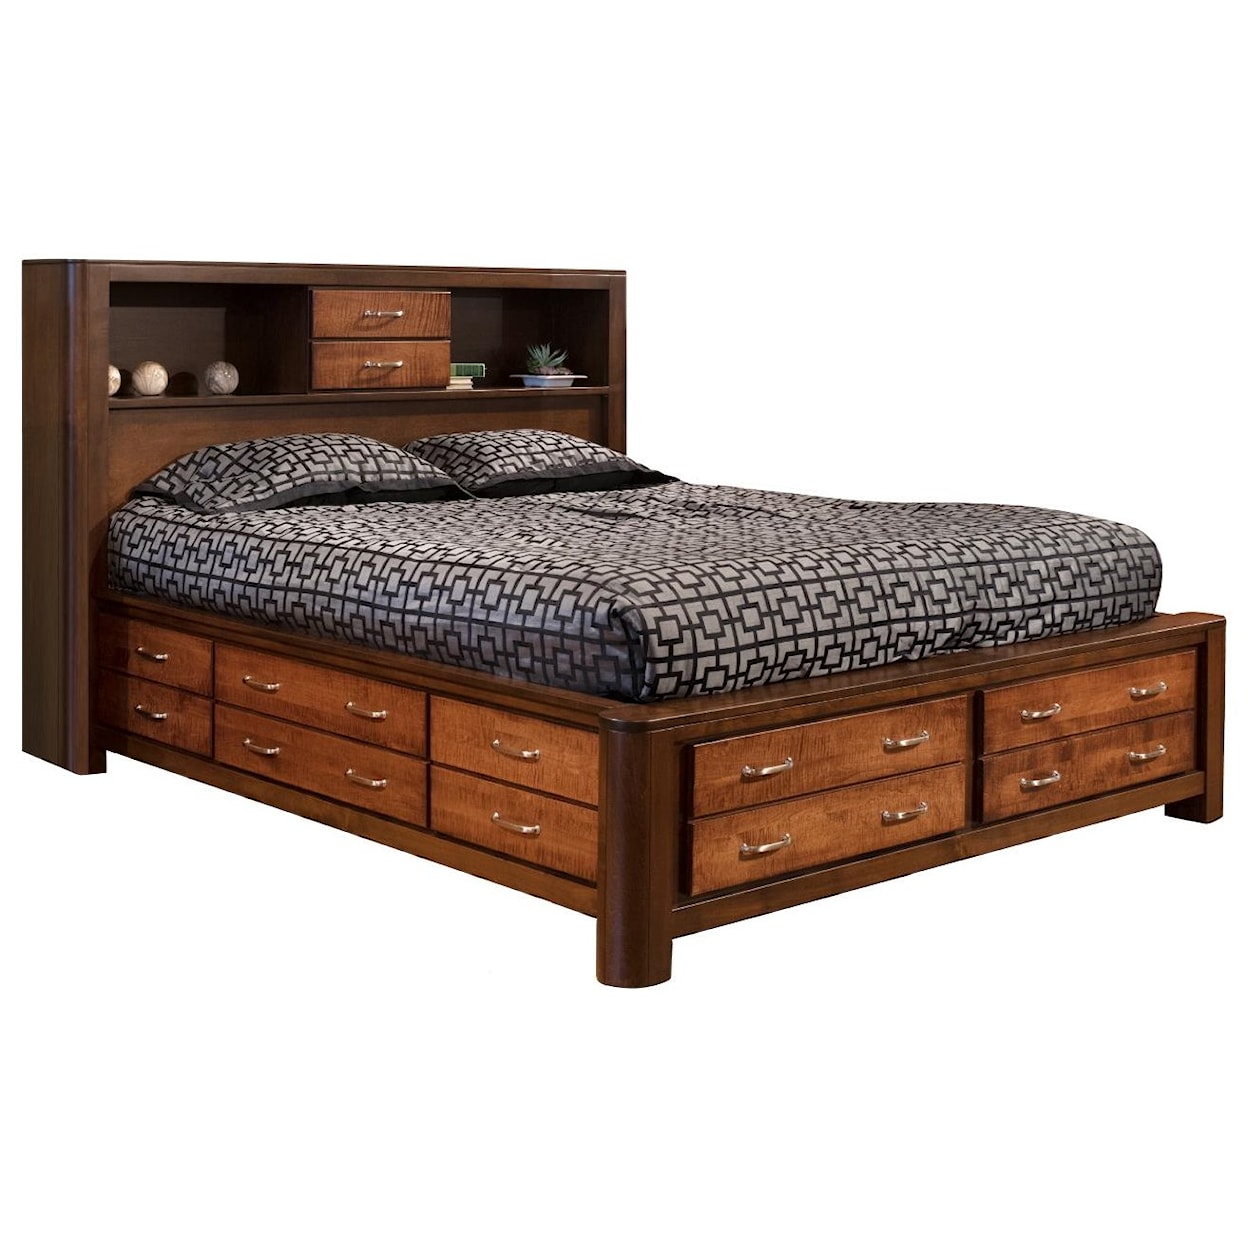 Deer Valley Woodworking London King Bookcase Bed